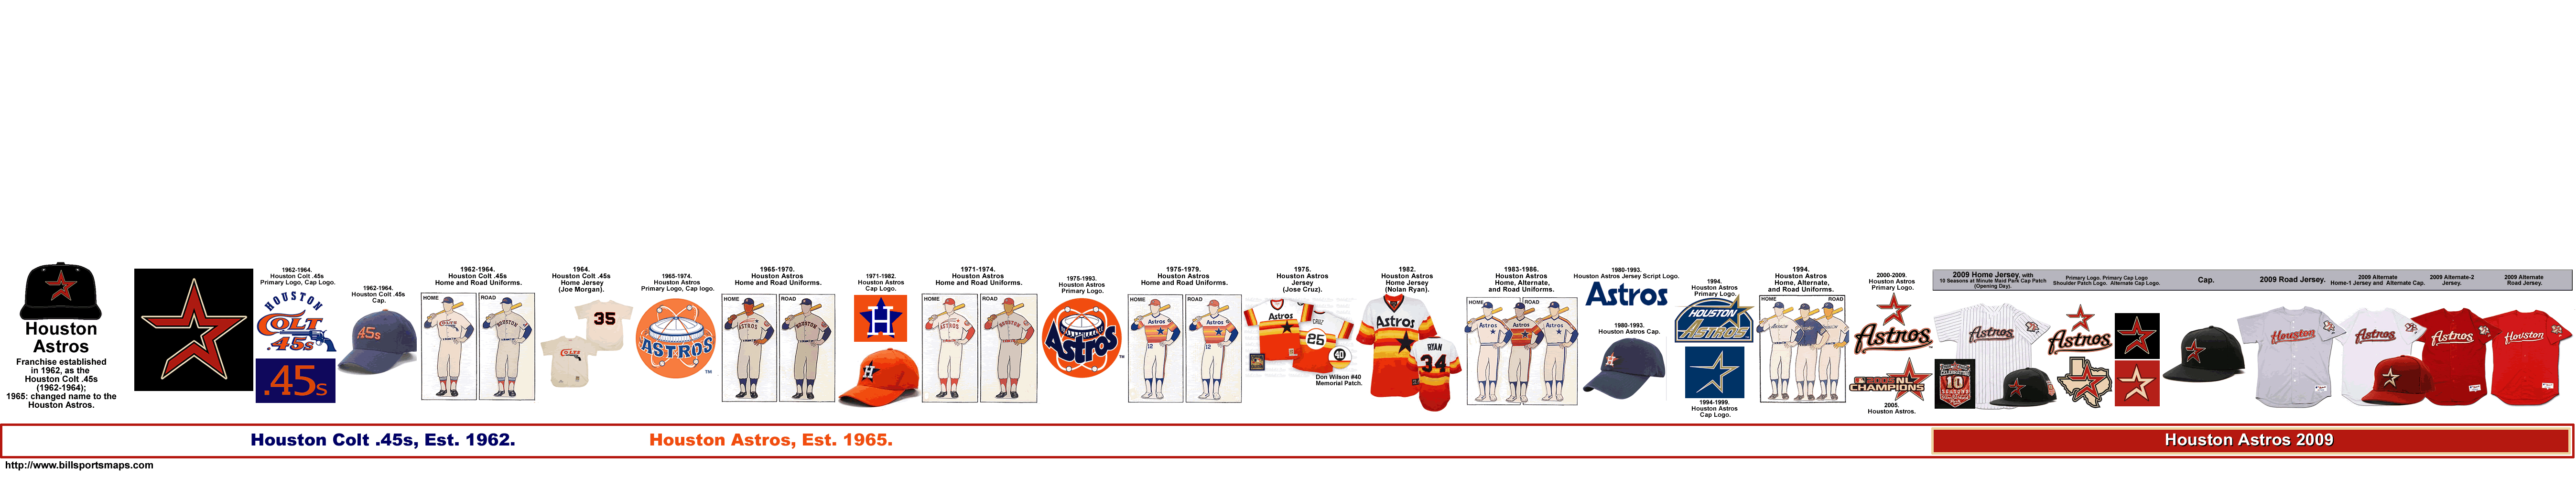 houston astros jerseys by year.